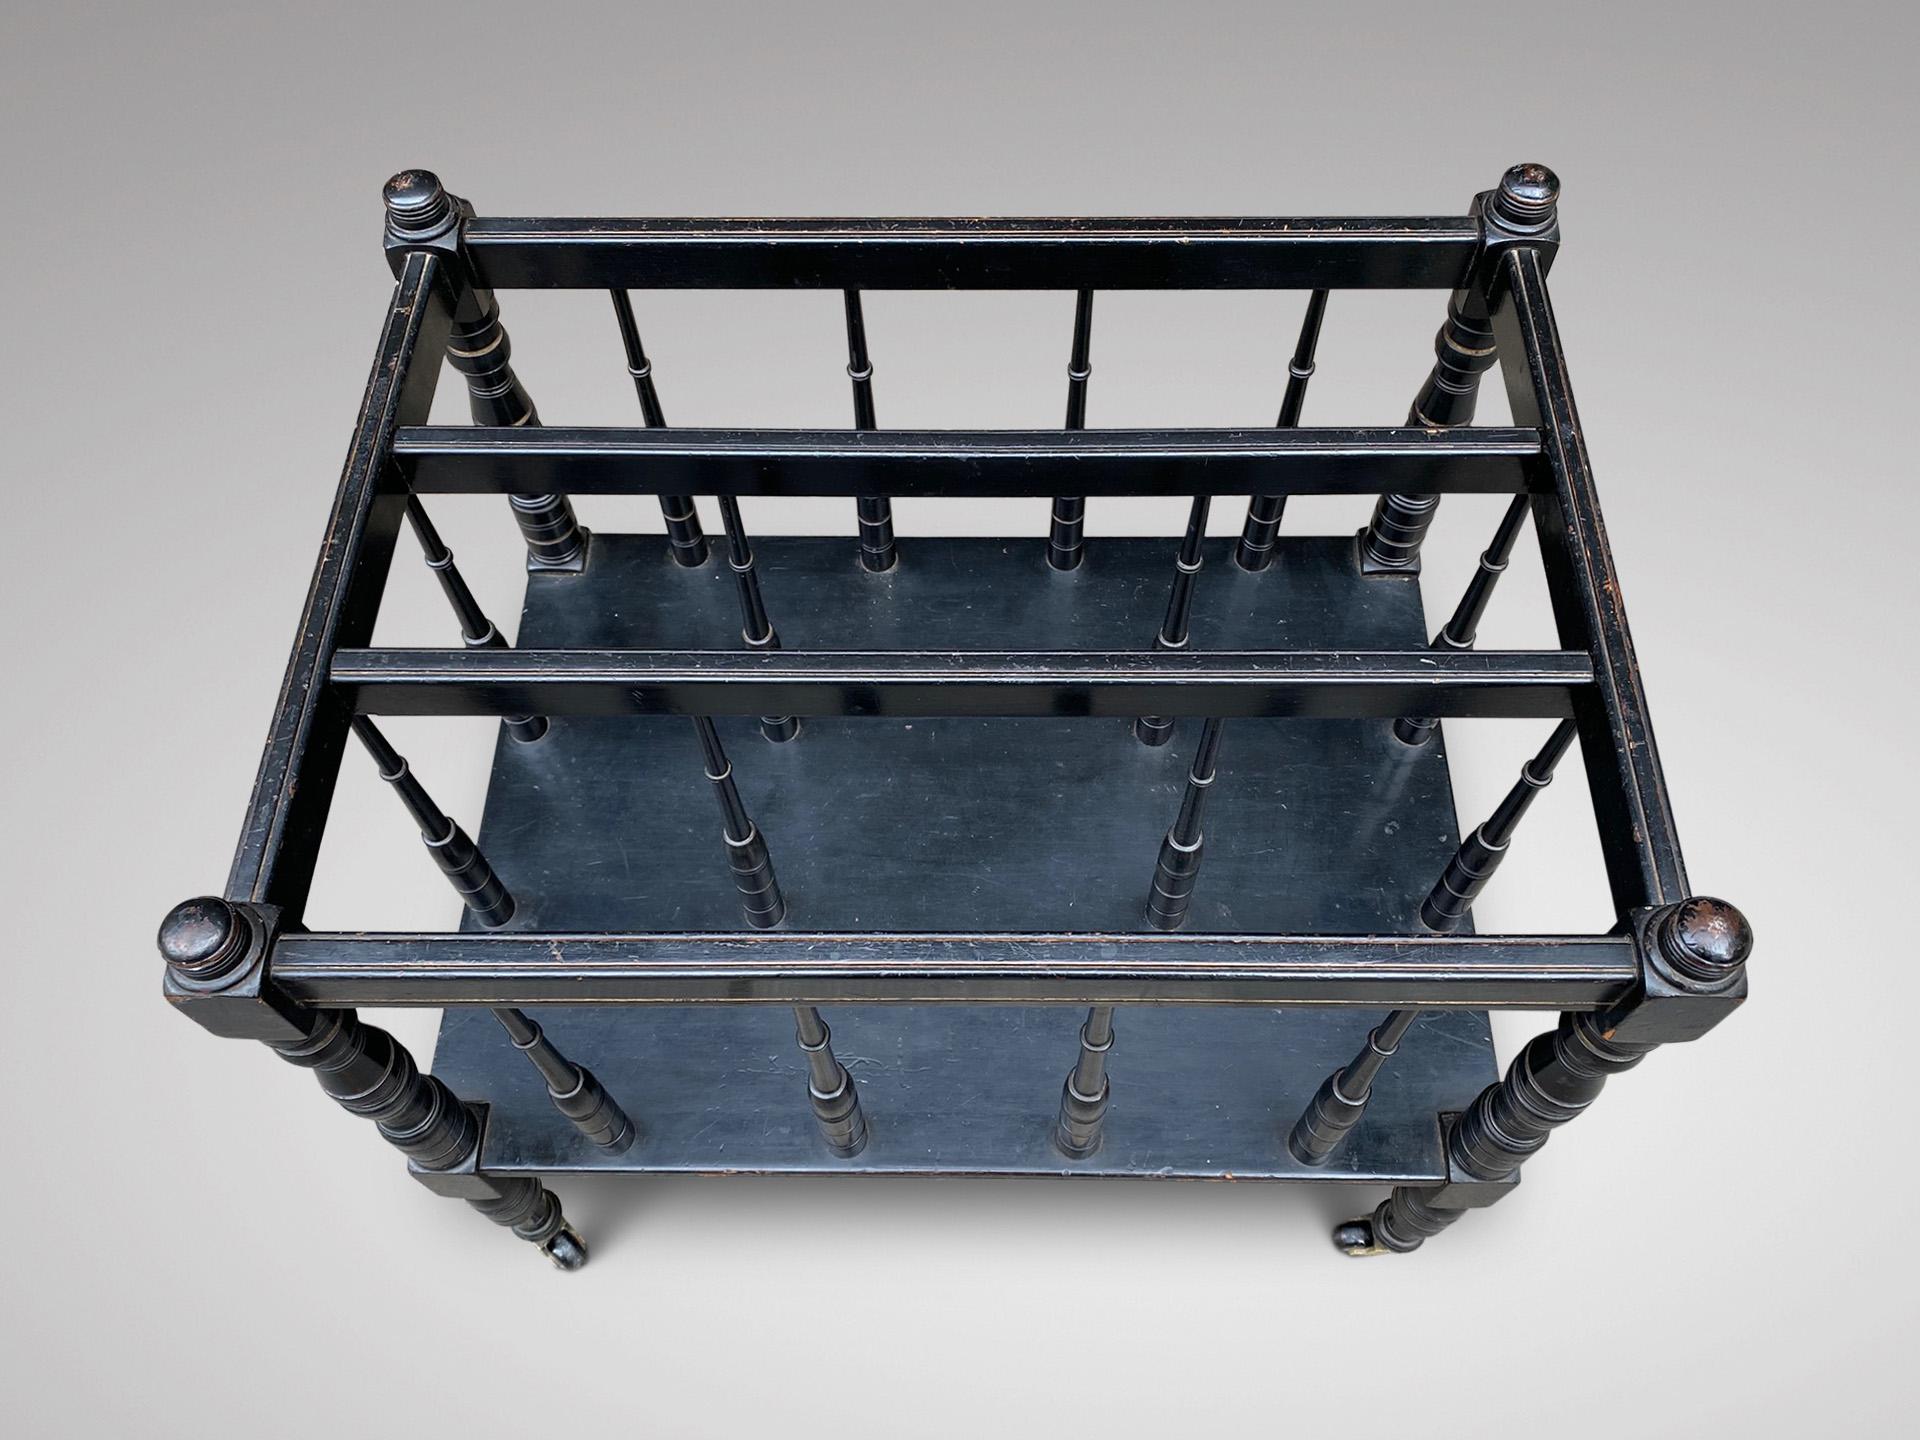 19th Century Victorian Period Black Painted Canterbury or Magazine Rack In Good Condition For Sale In Petworth,West Sussex, GB